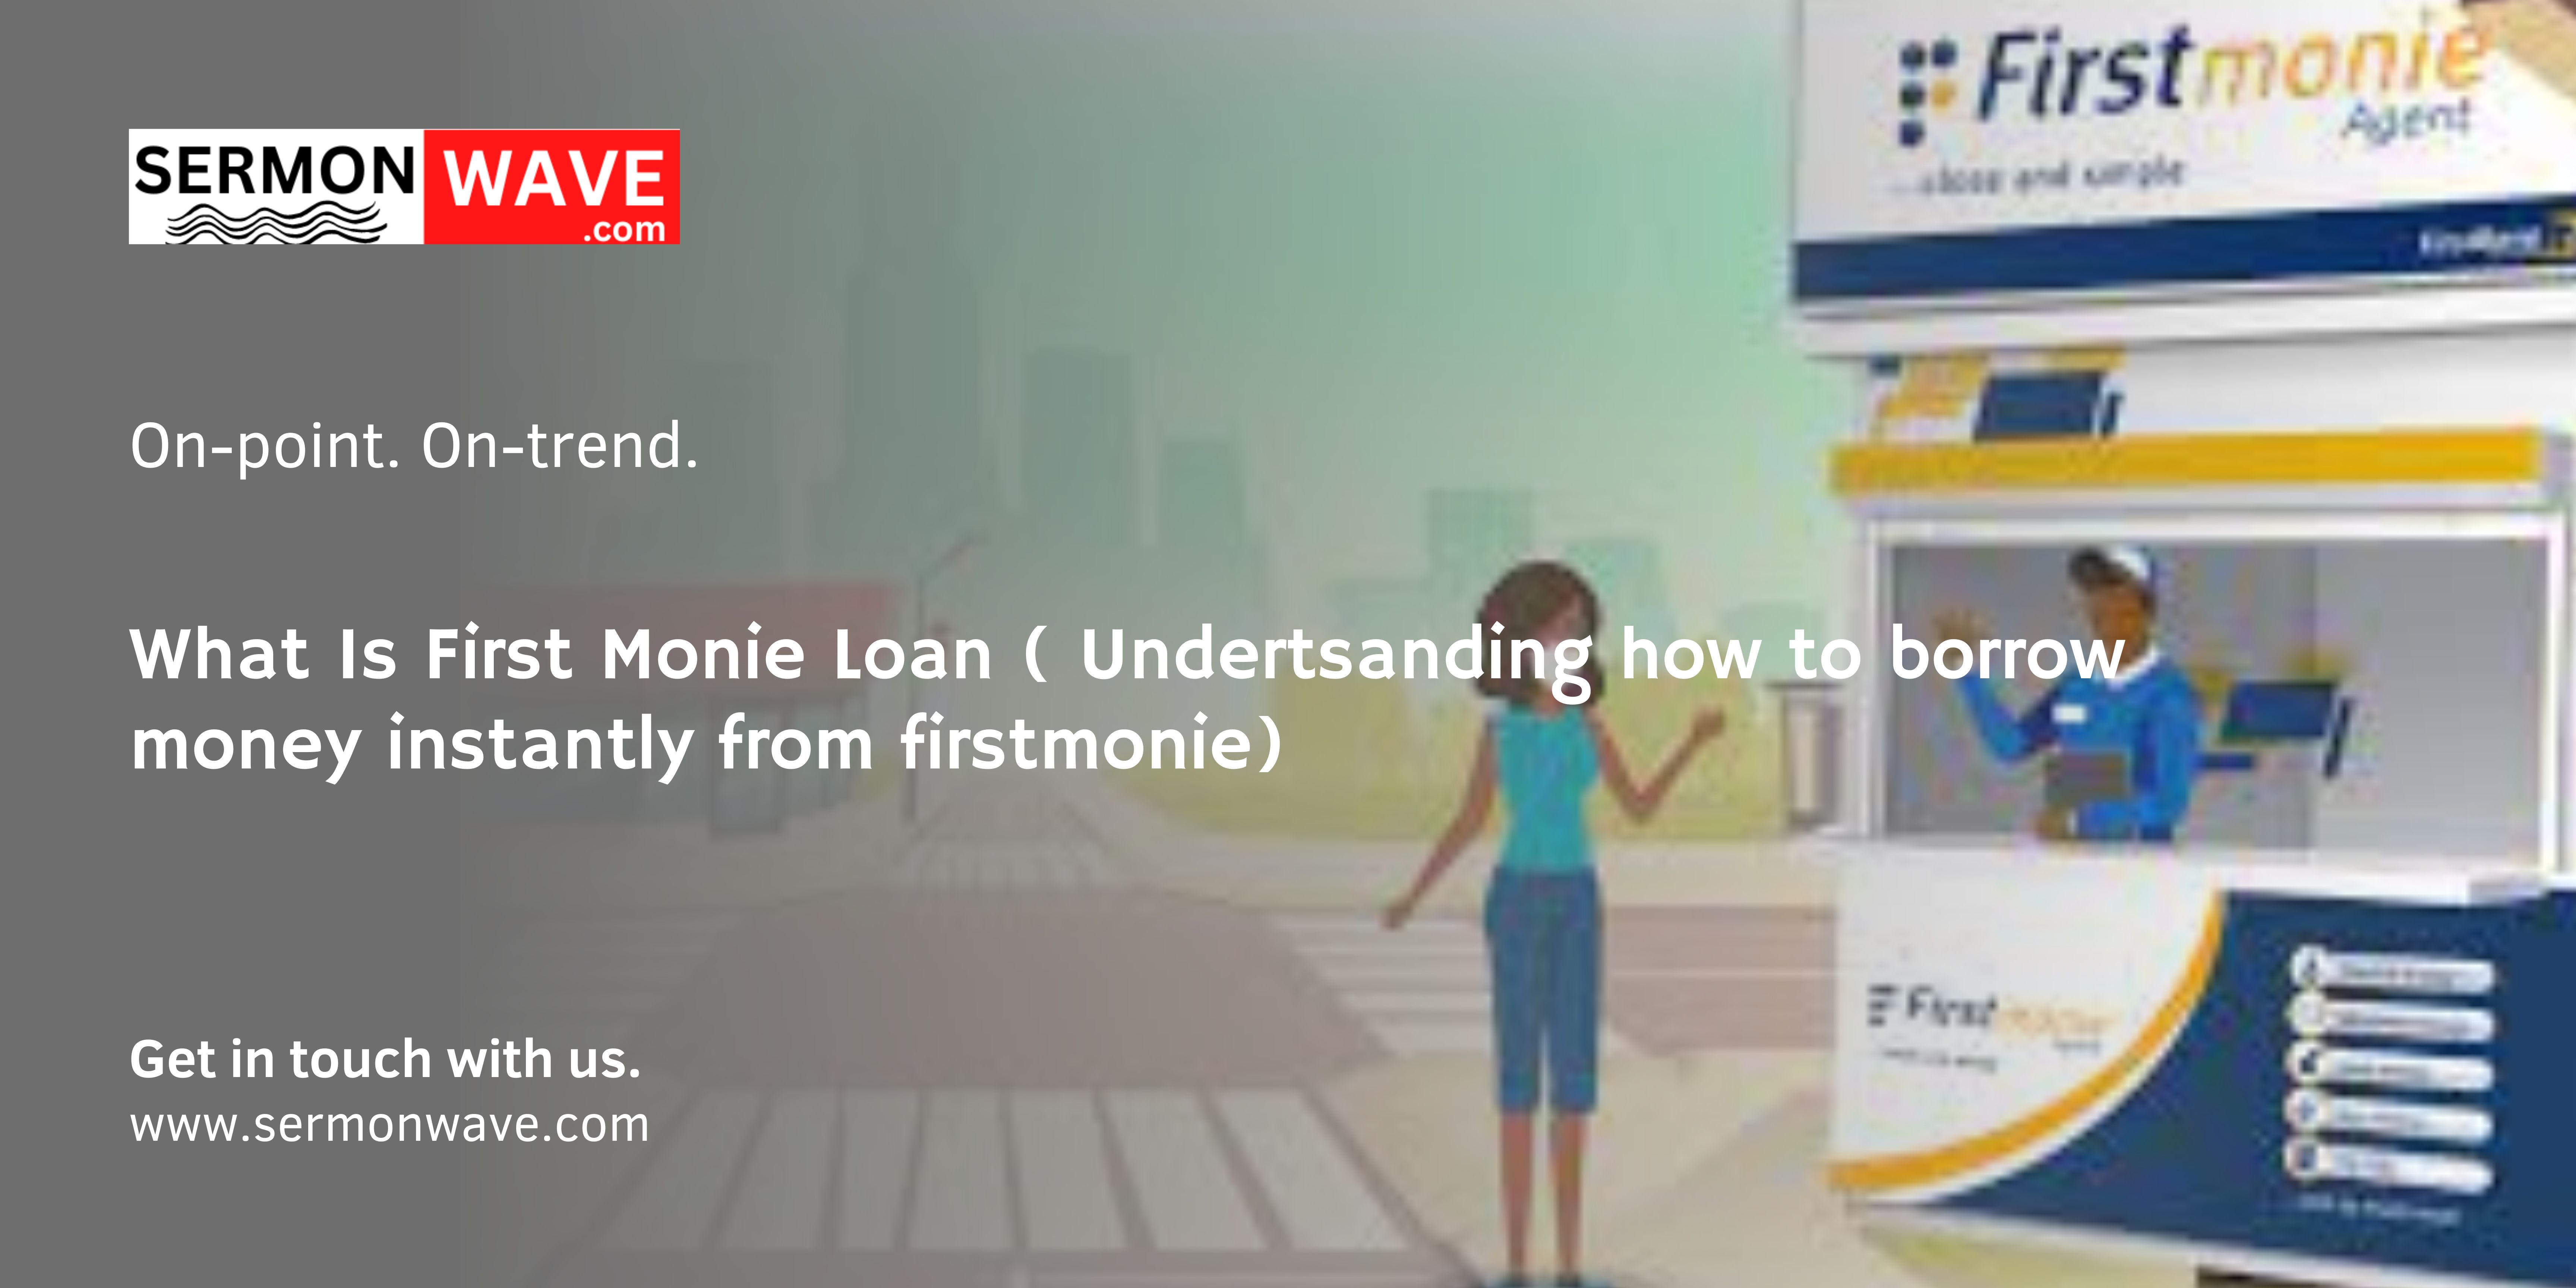 What Is First Monie Loan ( Undertsanding how to borrow money instantly from firstmonie)